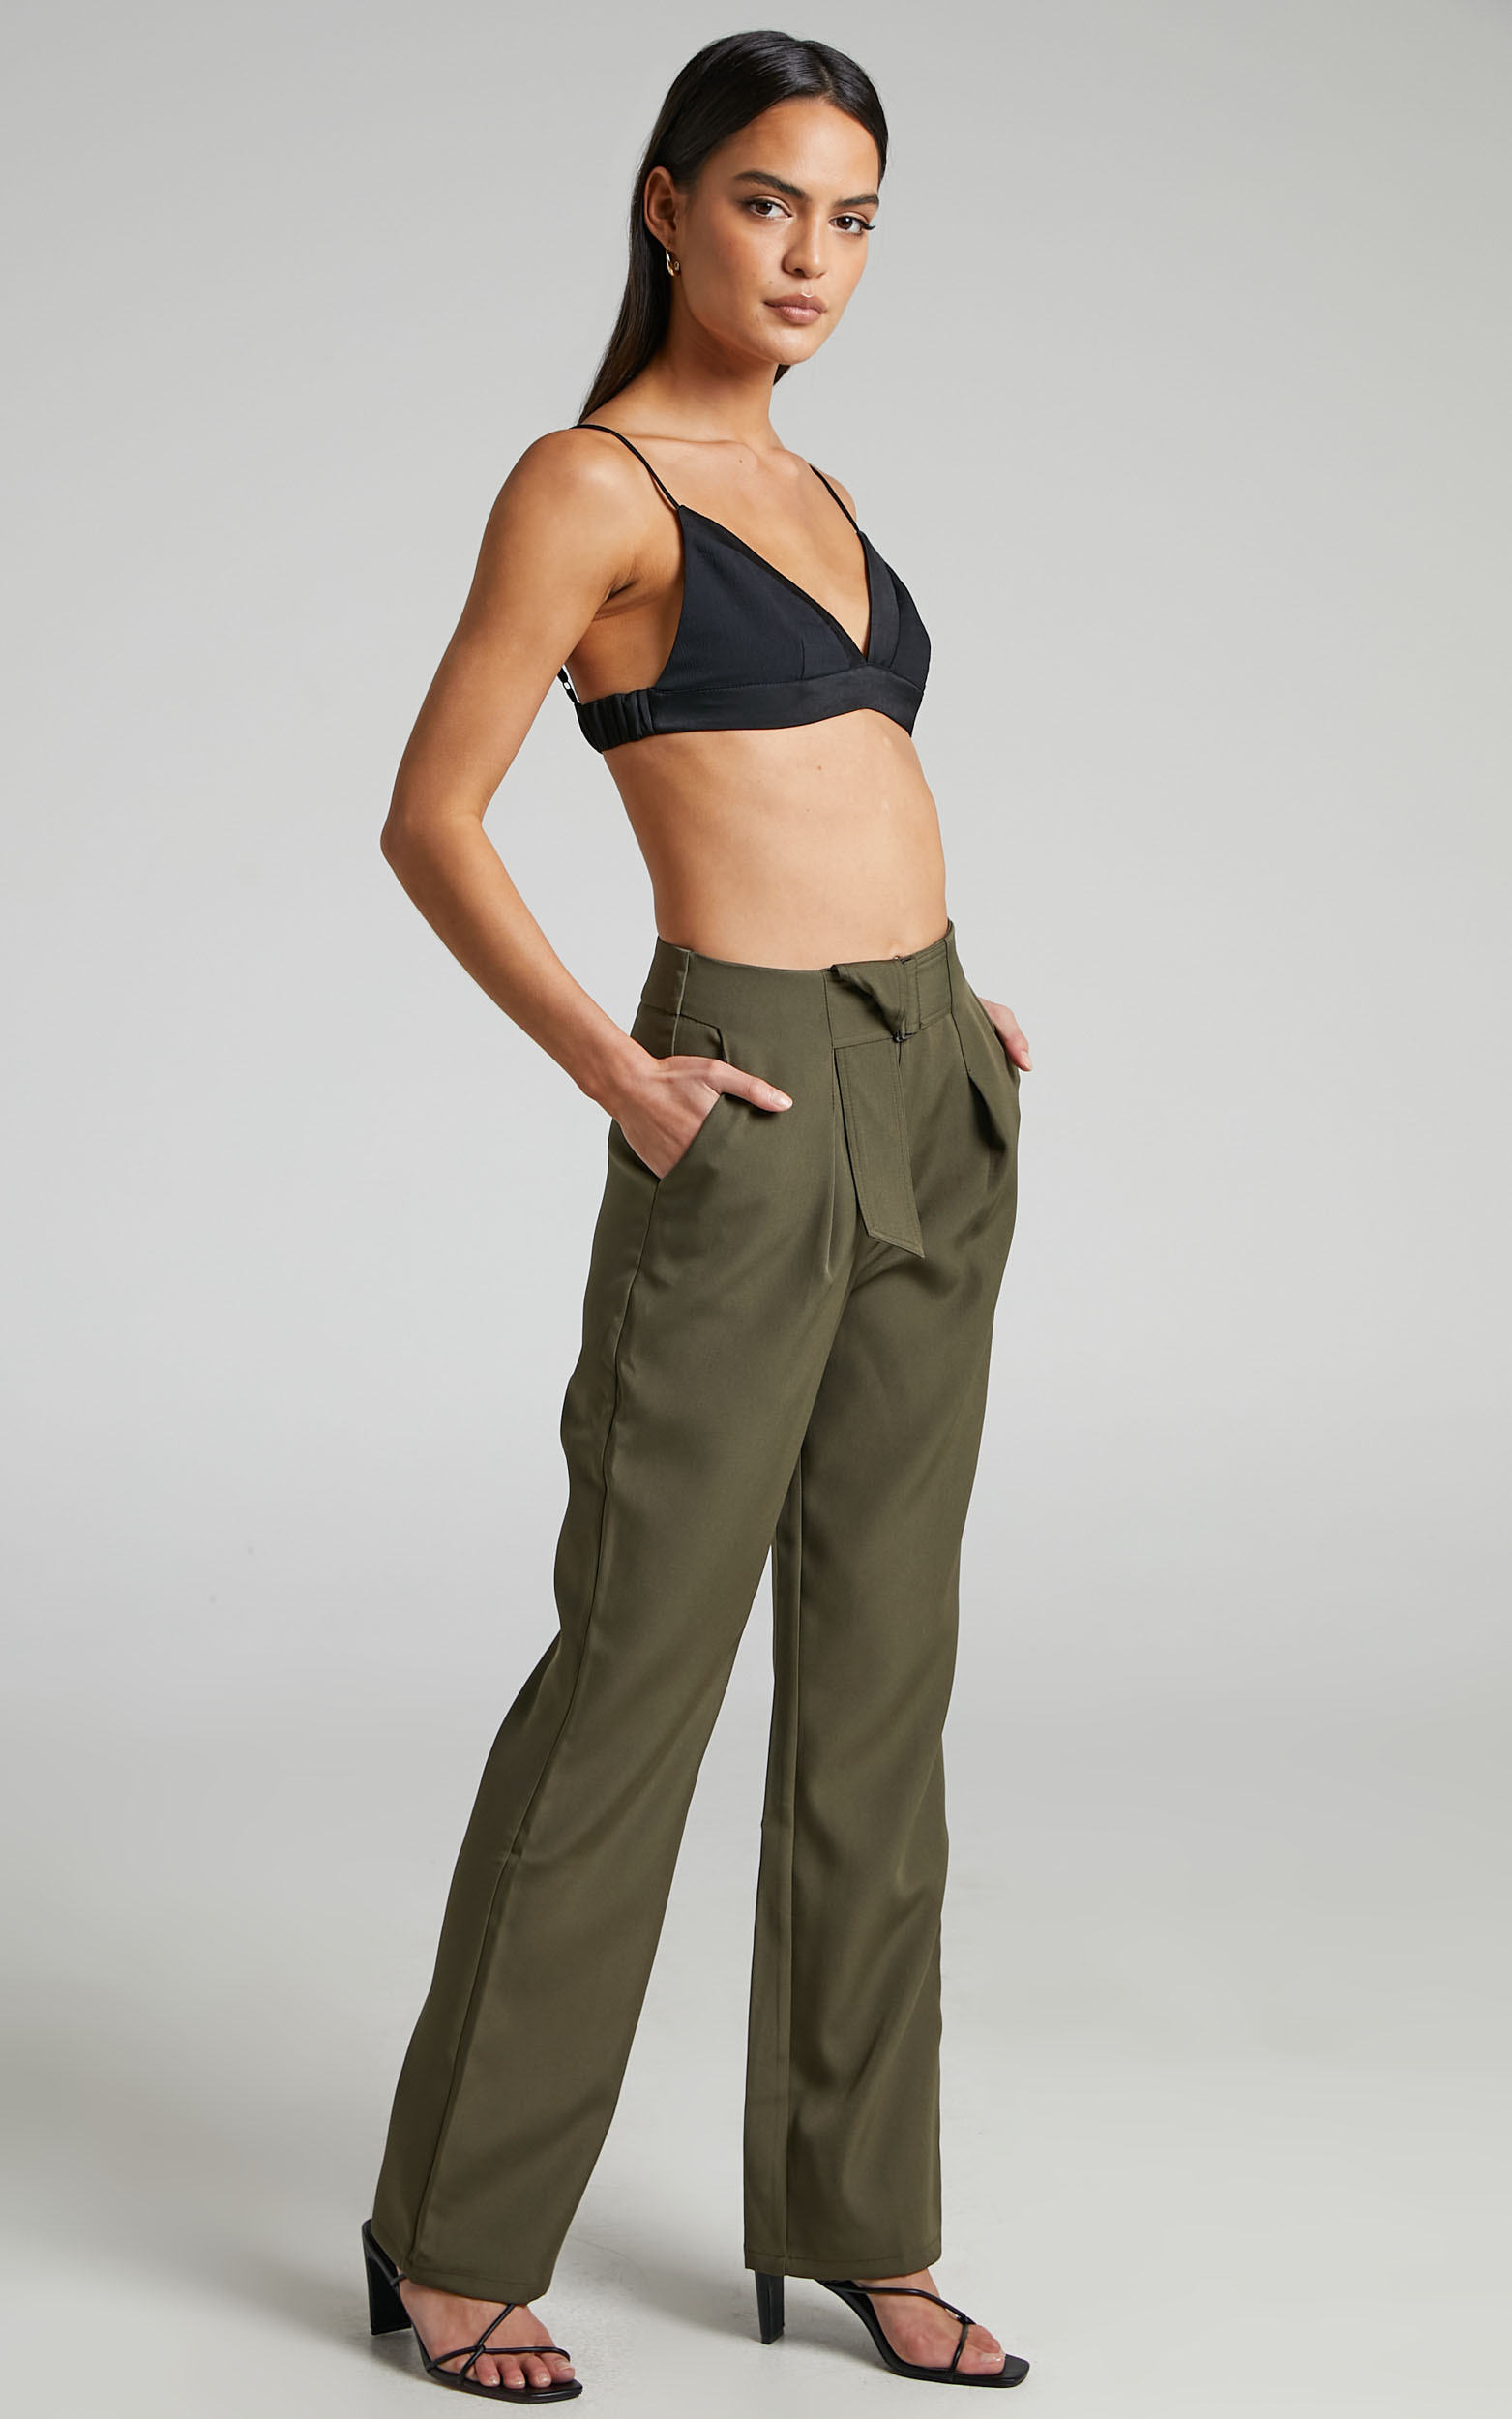 4th & Reckless - Signe Trouser in Khaki - L, GRN1, hi-res image number null